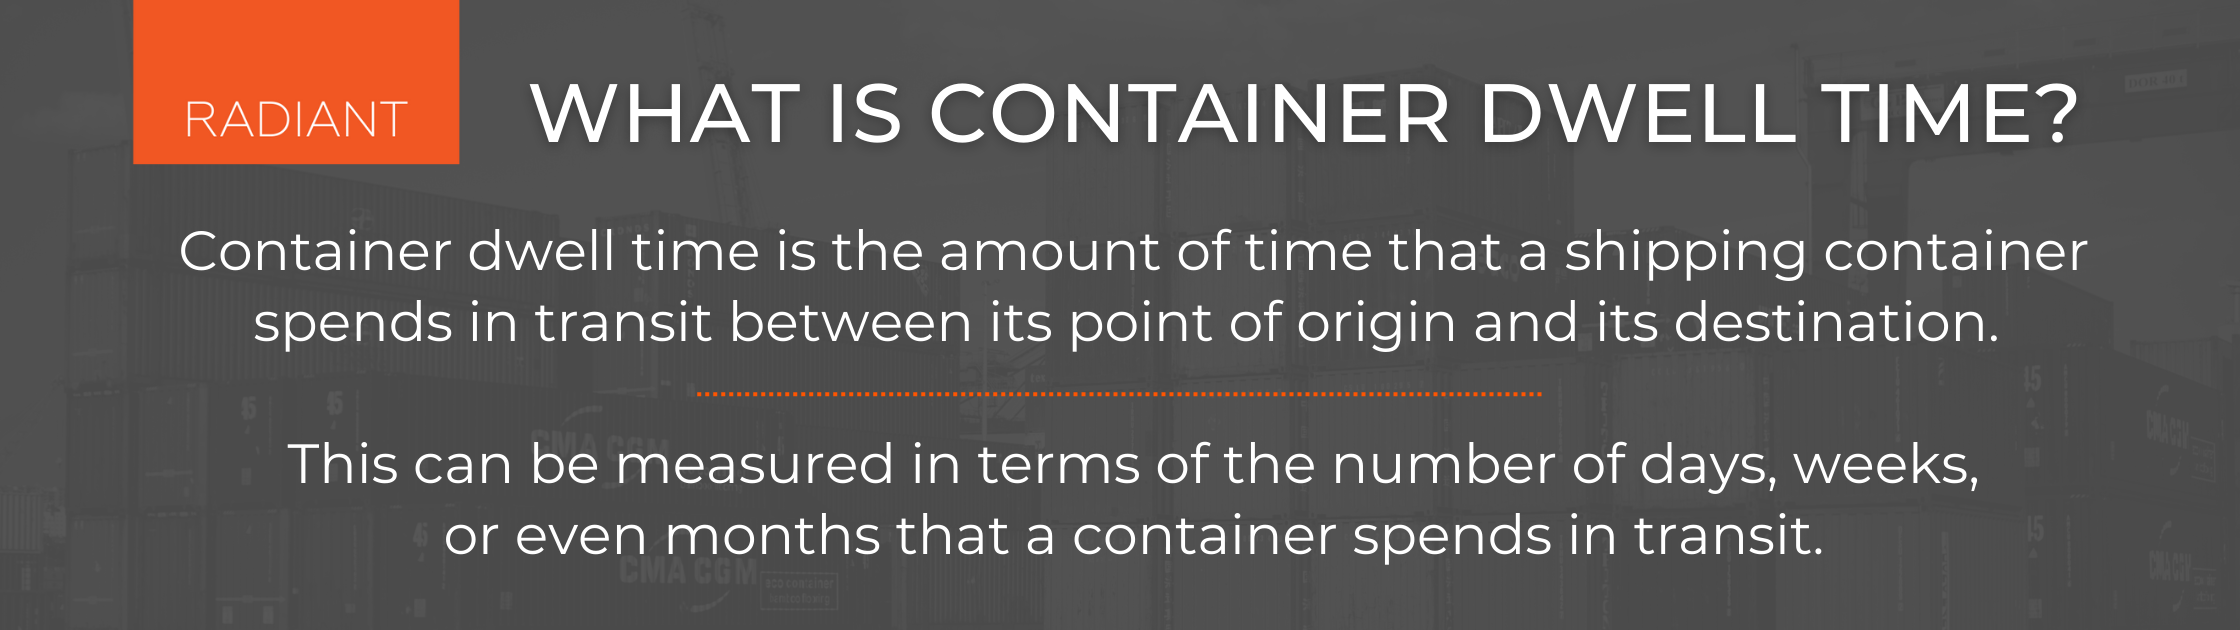 What is Container Dwell Time - Container Dwell Time - Reduce Dwell Time - Dwell Containers - Dwell Container - Supply Chain Efficiency - How To Improve Supply Chain Efficiency - How To Increase Supply Chain Efficiency - Efficient Supply Chain